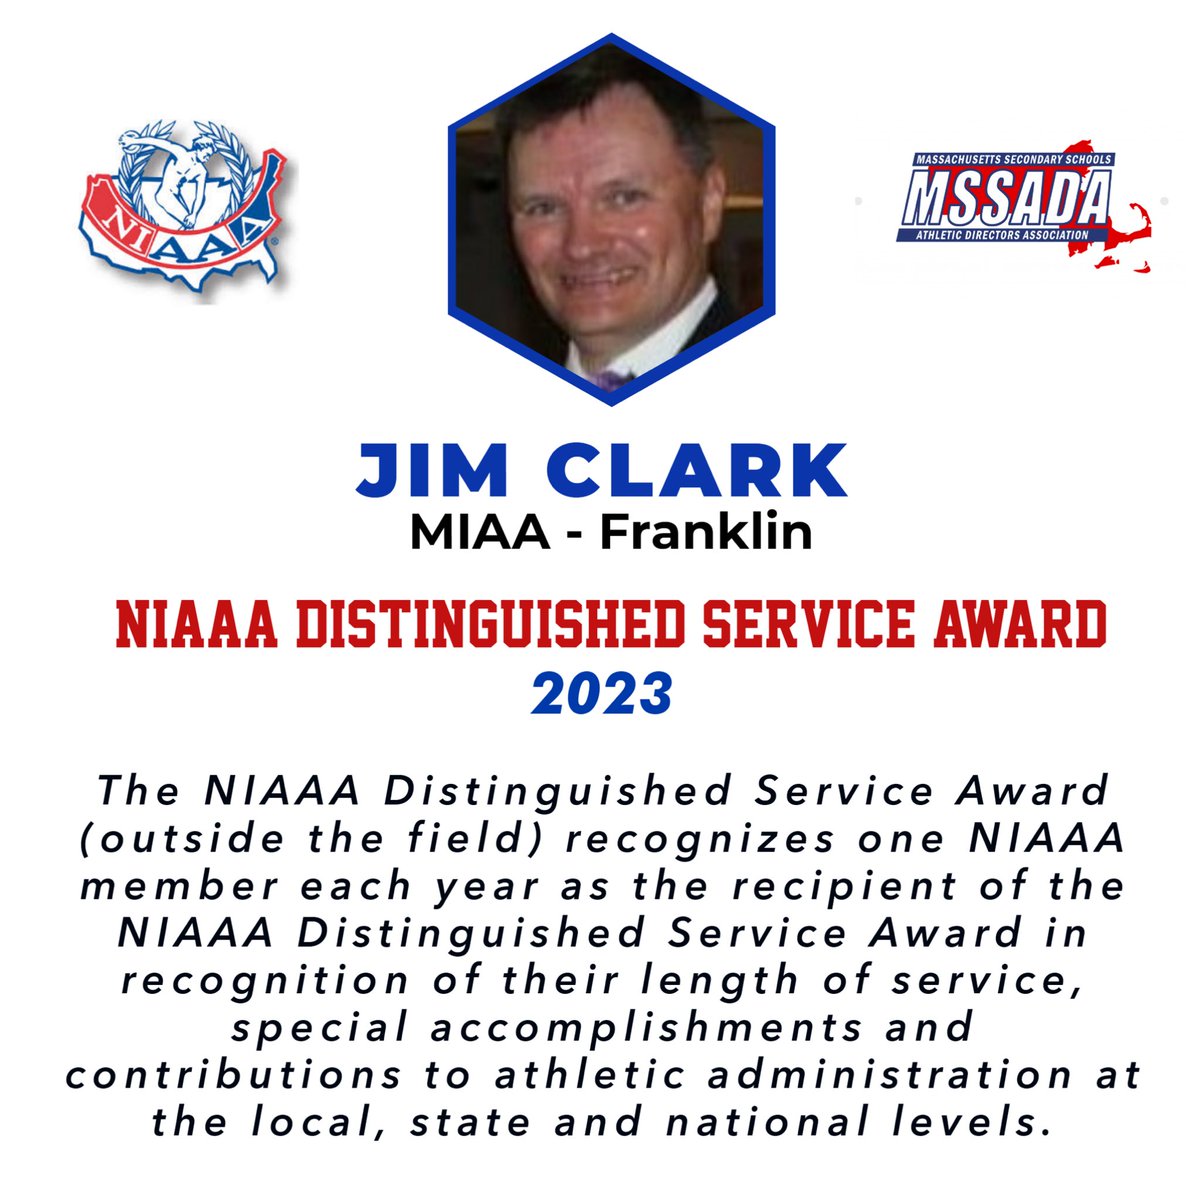 Congrats to Jim Clark on being the recipient of the NIAAA Distinguished Service Award - Outside the Field of Athletic Administration! @MIAA033